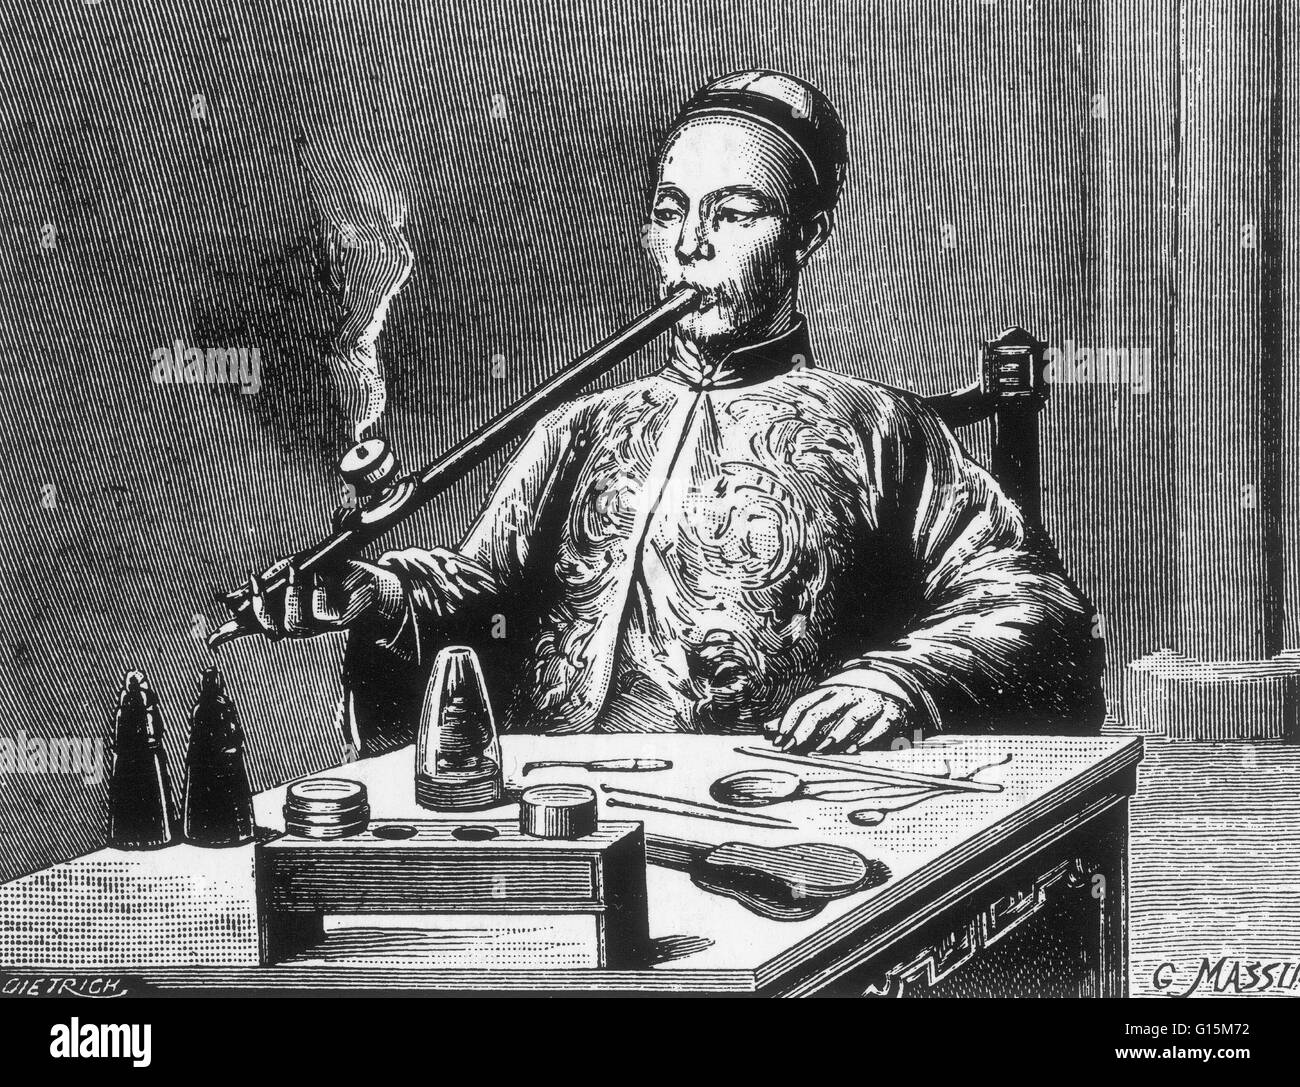 Man smoking opium through an opium pipe. Opium is a narcotic drug obtained from the seeds of the opium poppy. It contains the chemicals morphine and codeine, as well as other alkaloids. The opium resin from the poppy is processed, and then burned in pipes Stock Photo